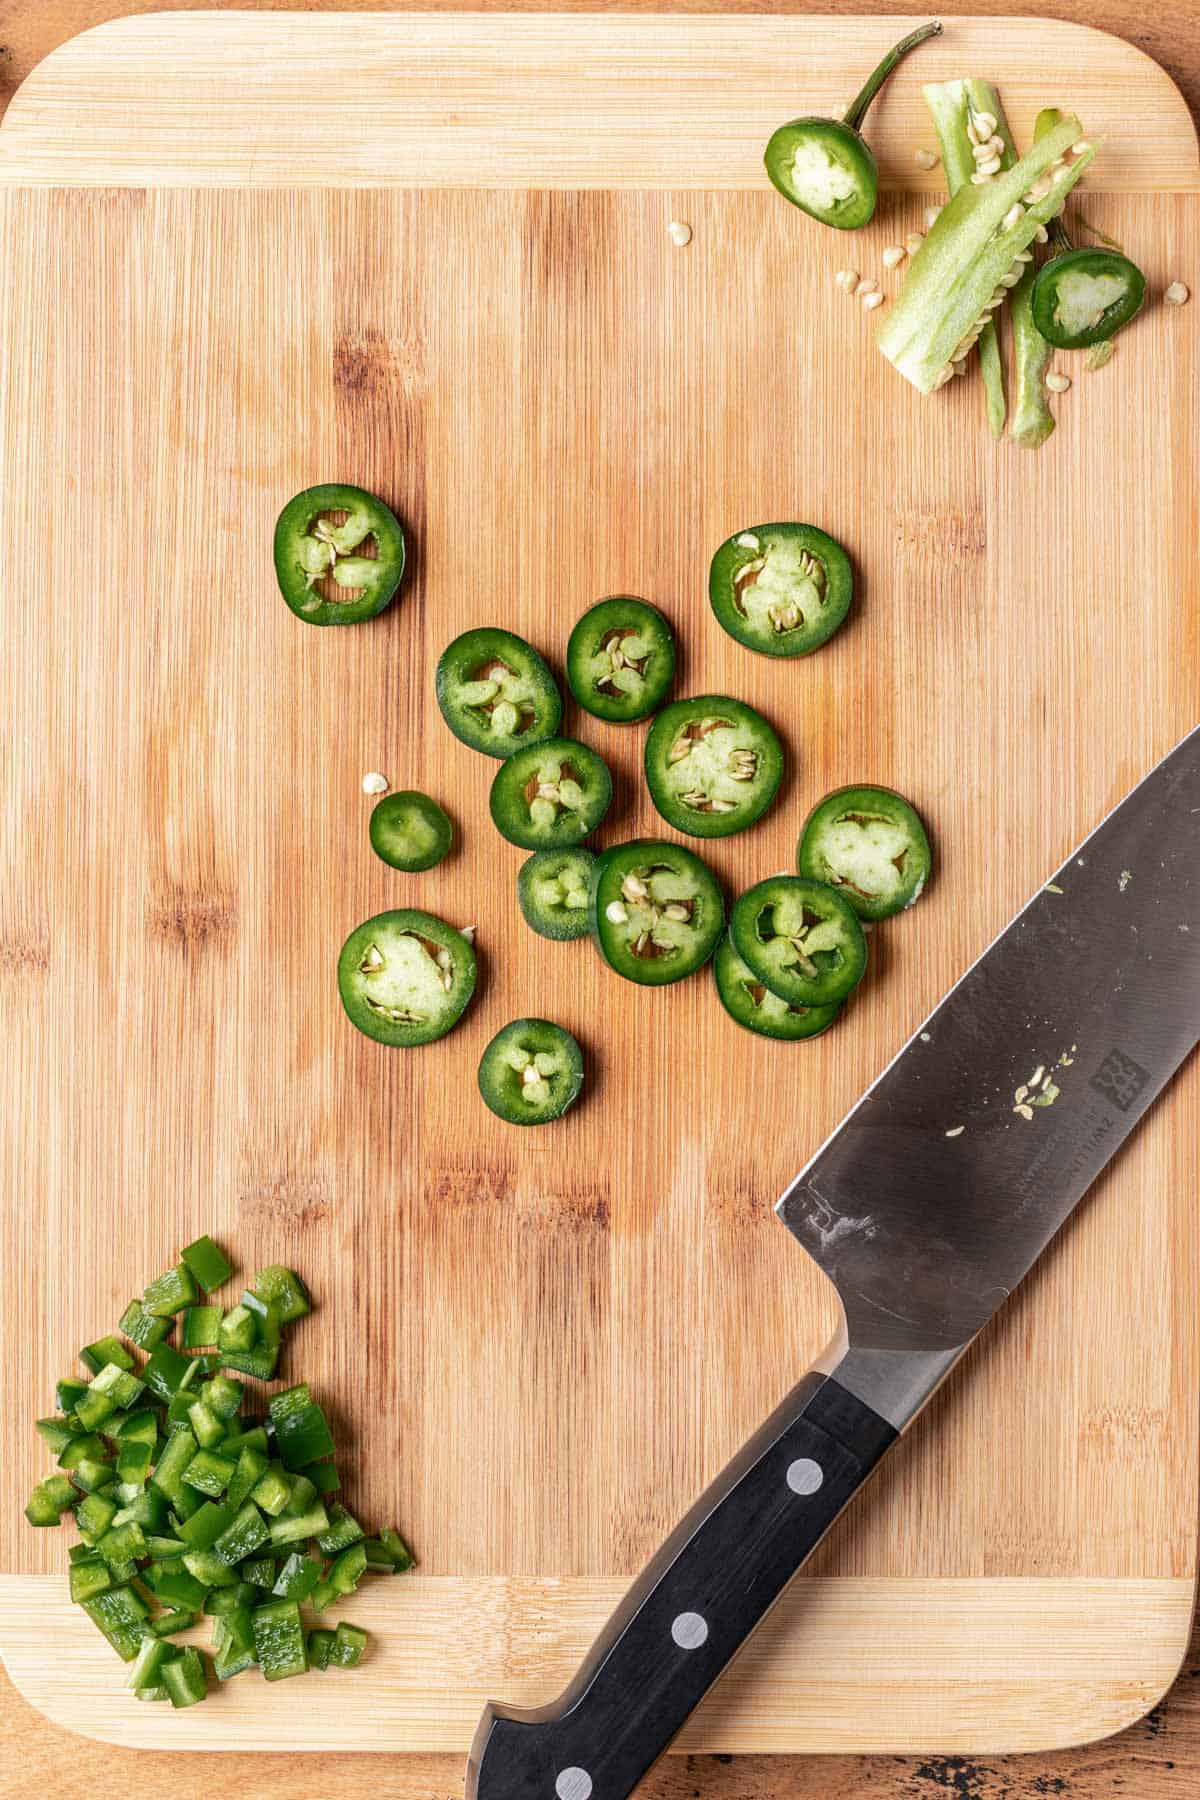 Sliced jalapeño in the middle of a wood cutting board.